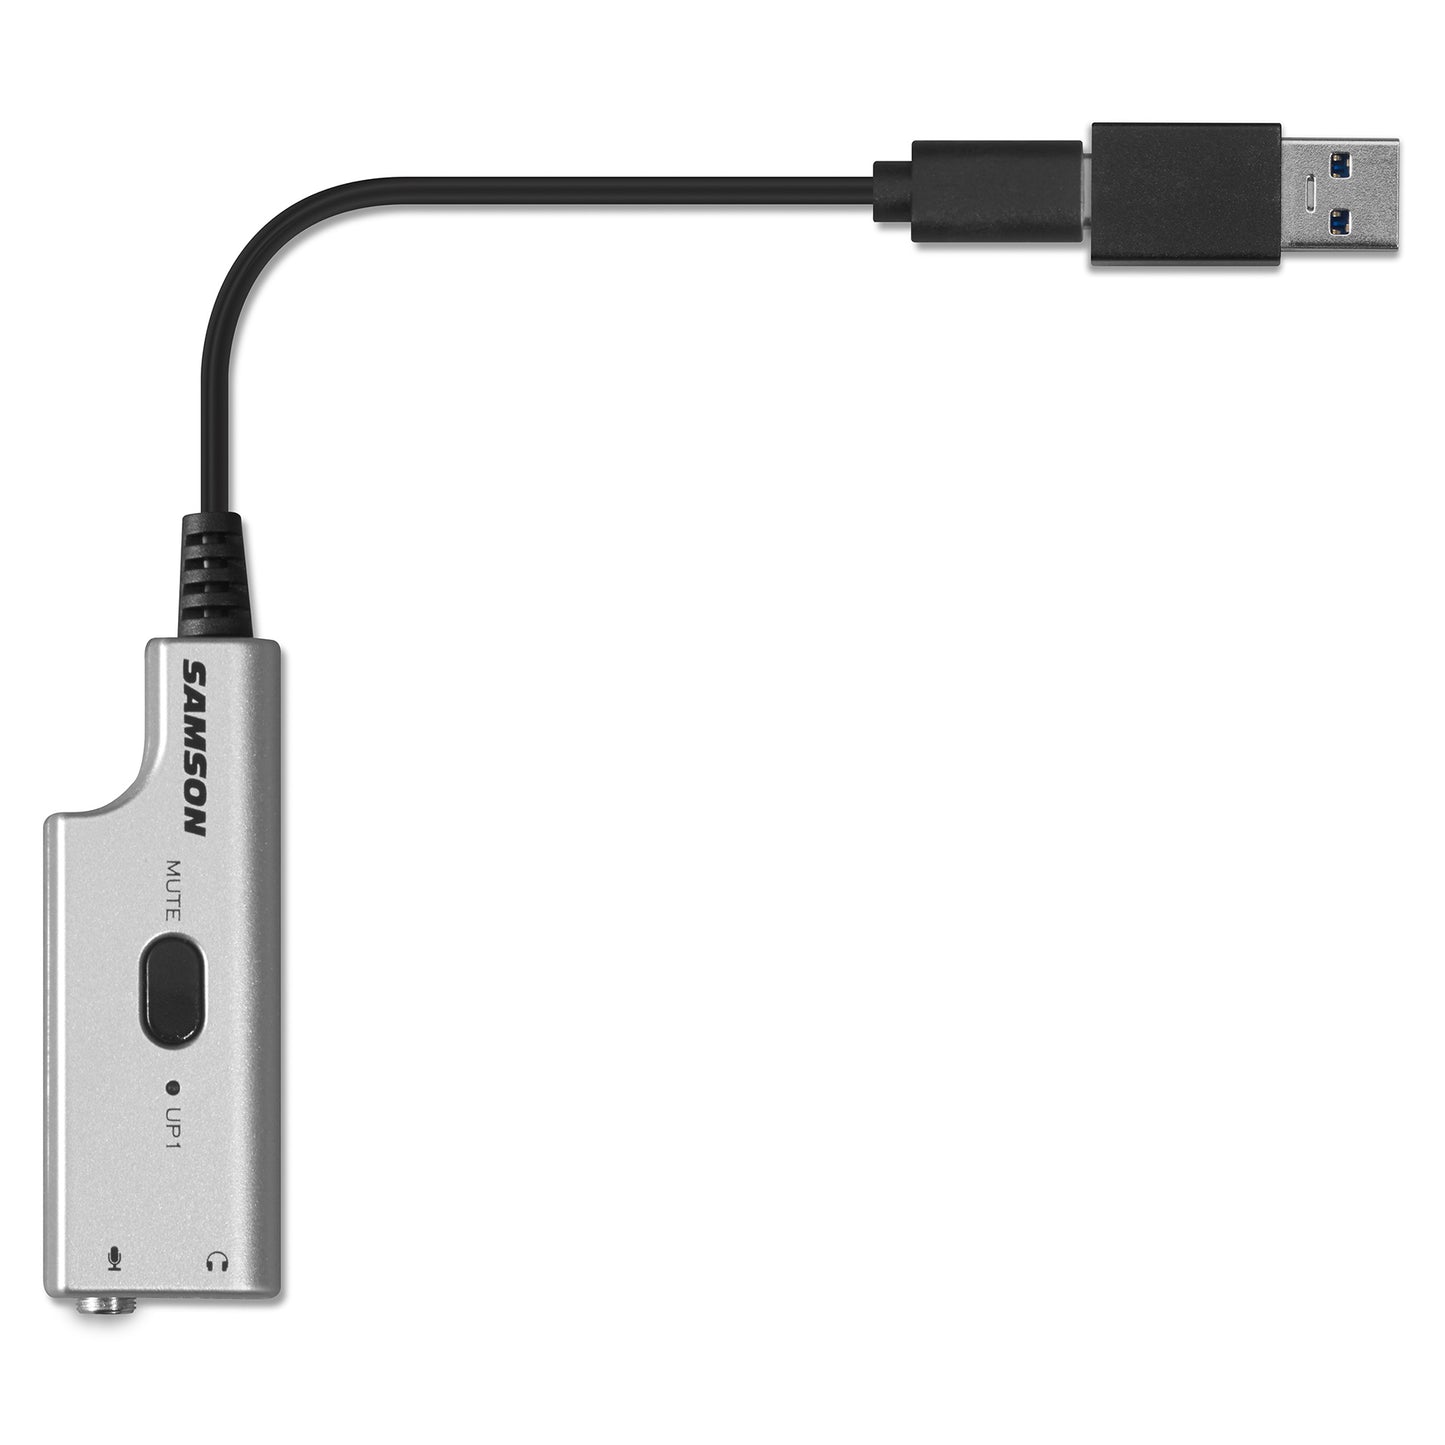 Samson LMU1 Broadcast Lavalier USB Microphone with Type C to USB-A Adapter, AUX In, Headphone Output for Video, Vlogging, Recording